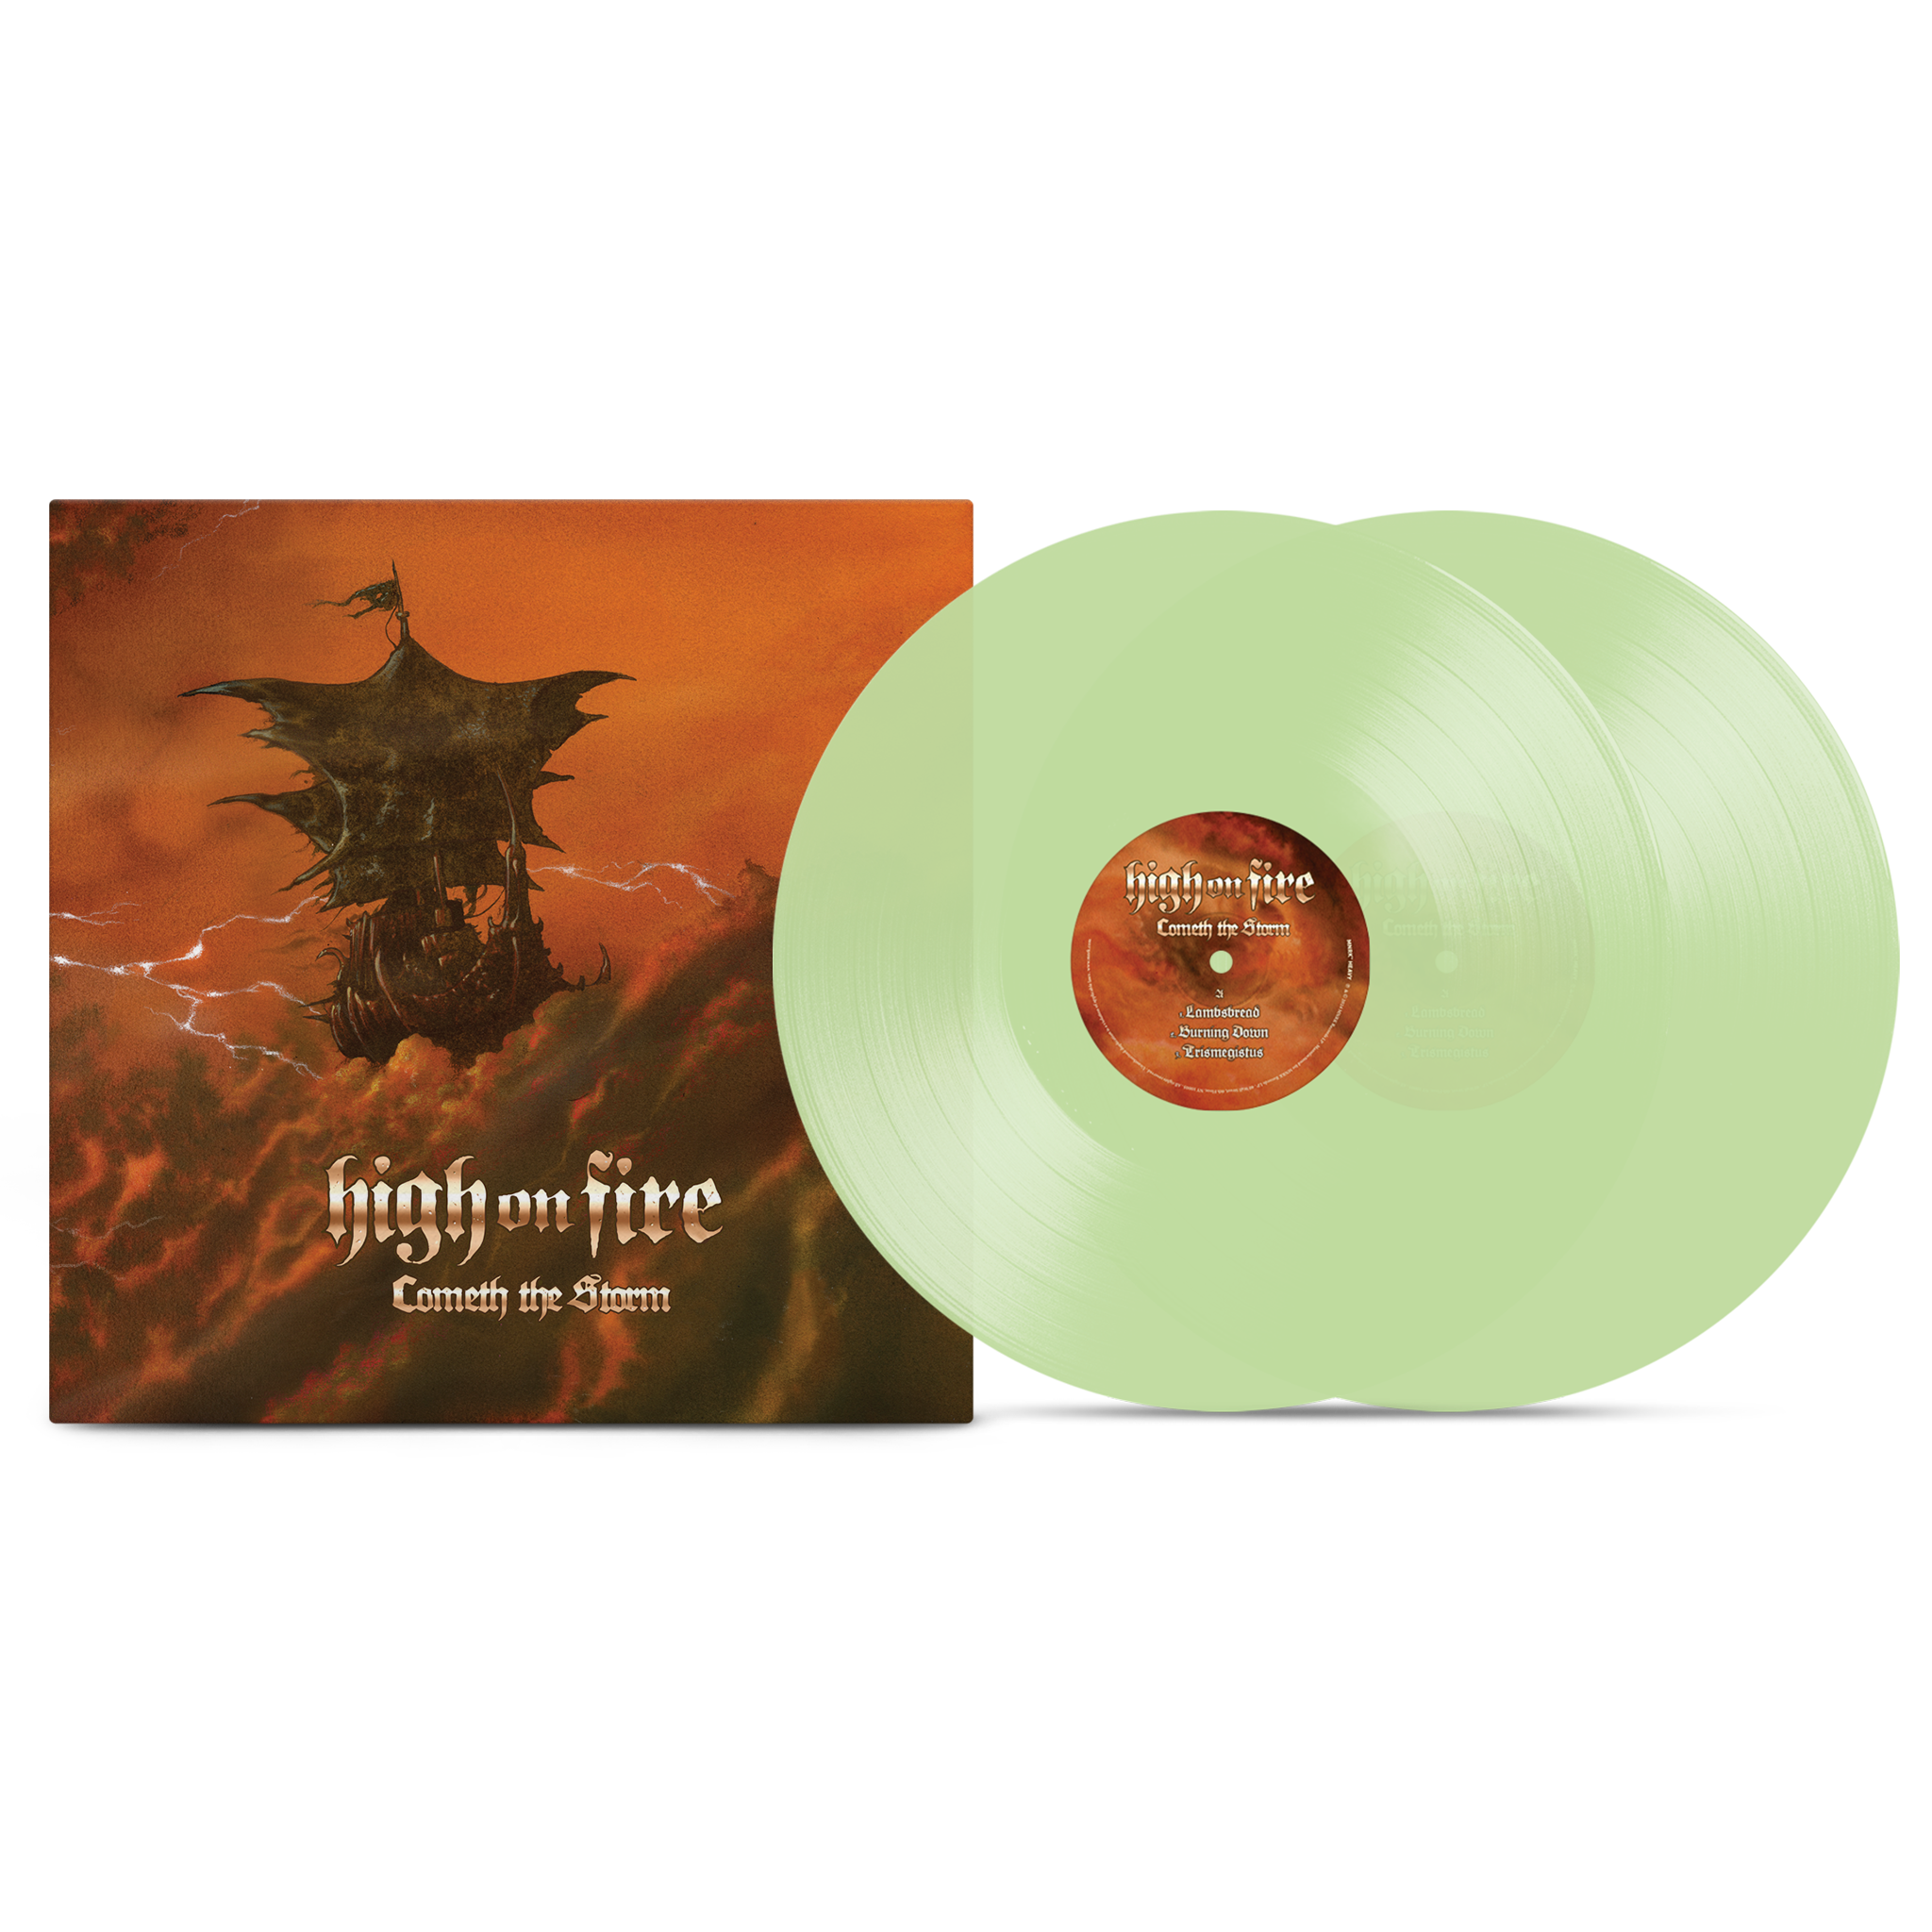 High On Fire - Cometh The Storm available on MNRK Heavy